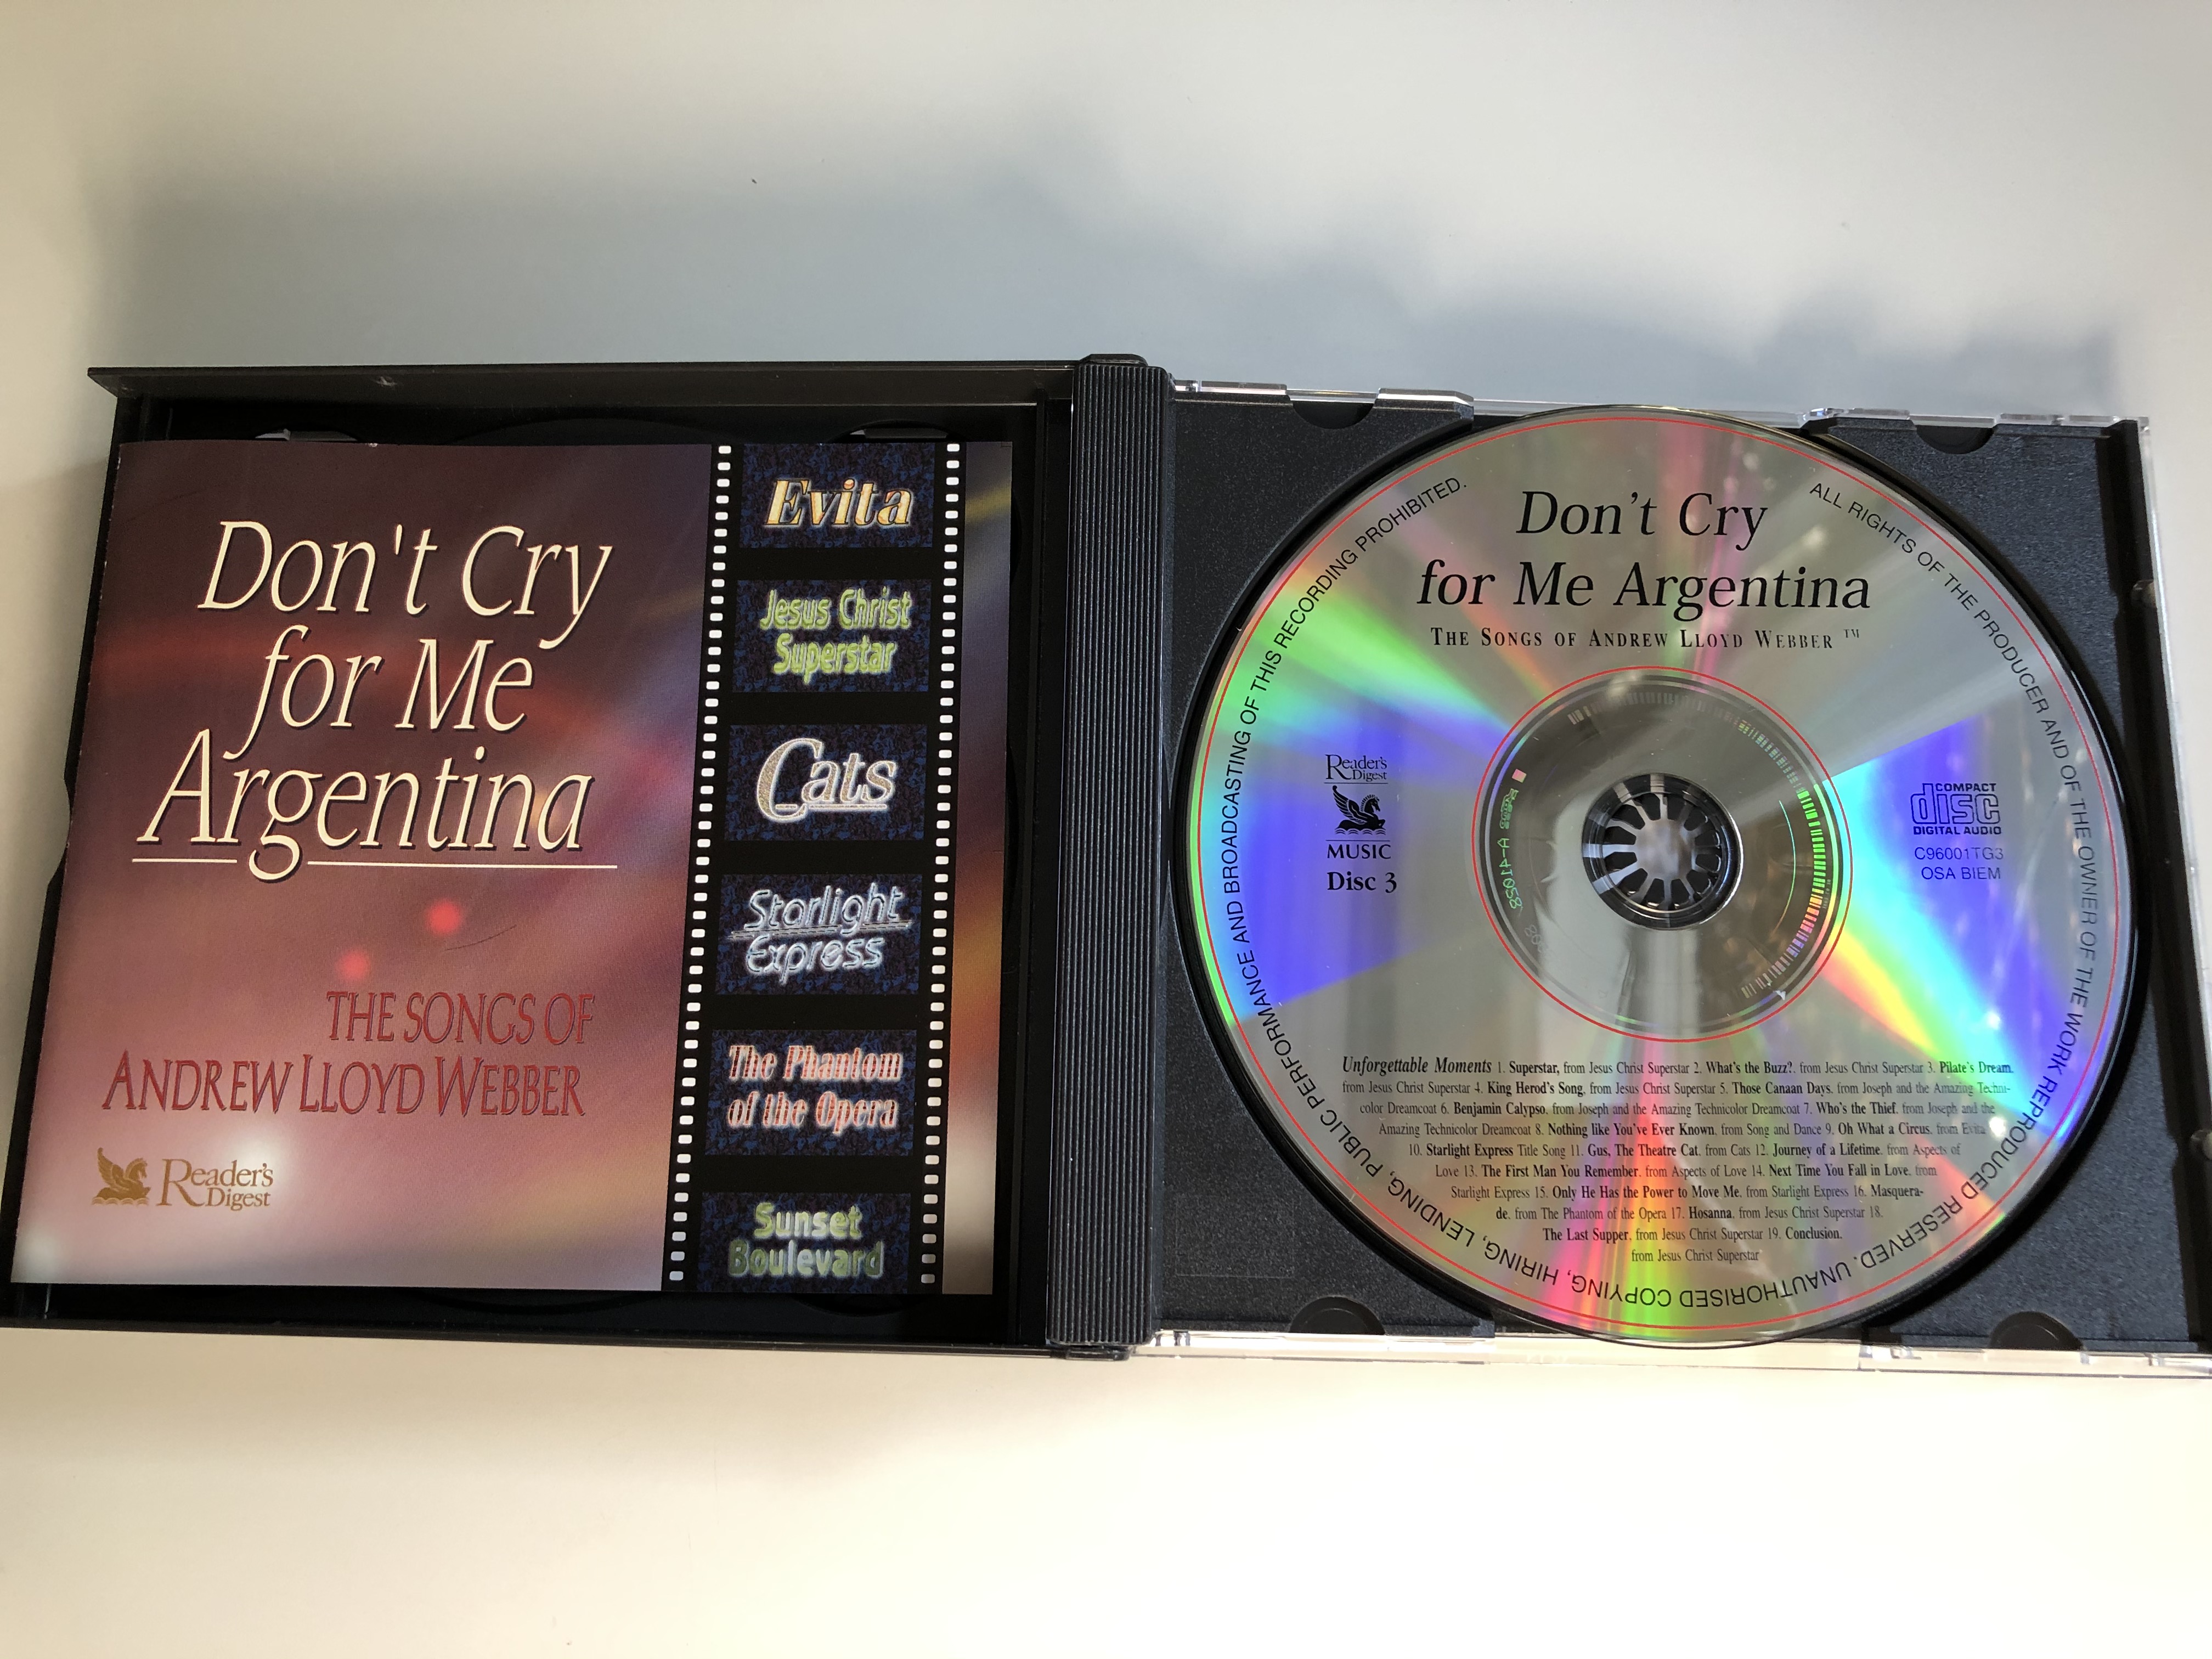 don-t-cry-for-me-argentina-the-songs-of-andrew-lloyd-webber-evita-jesus-christ-superstar-cats-starlight-express-the-phantom-of-the-opera-sunset-boulevard-reader-s-digest-3x-audio-cd-c96-4-.jpg